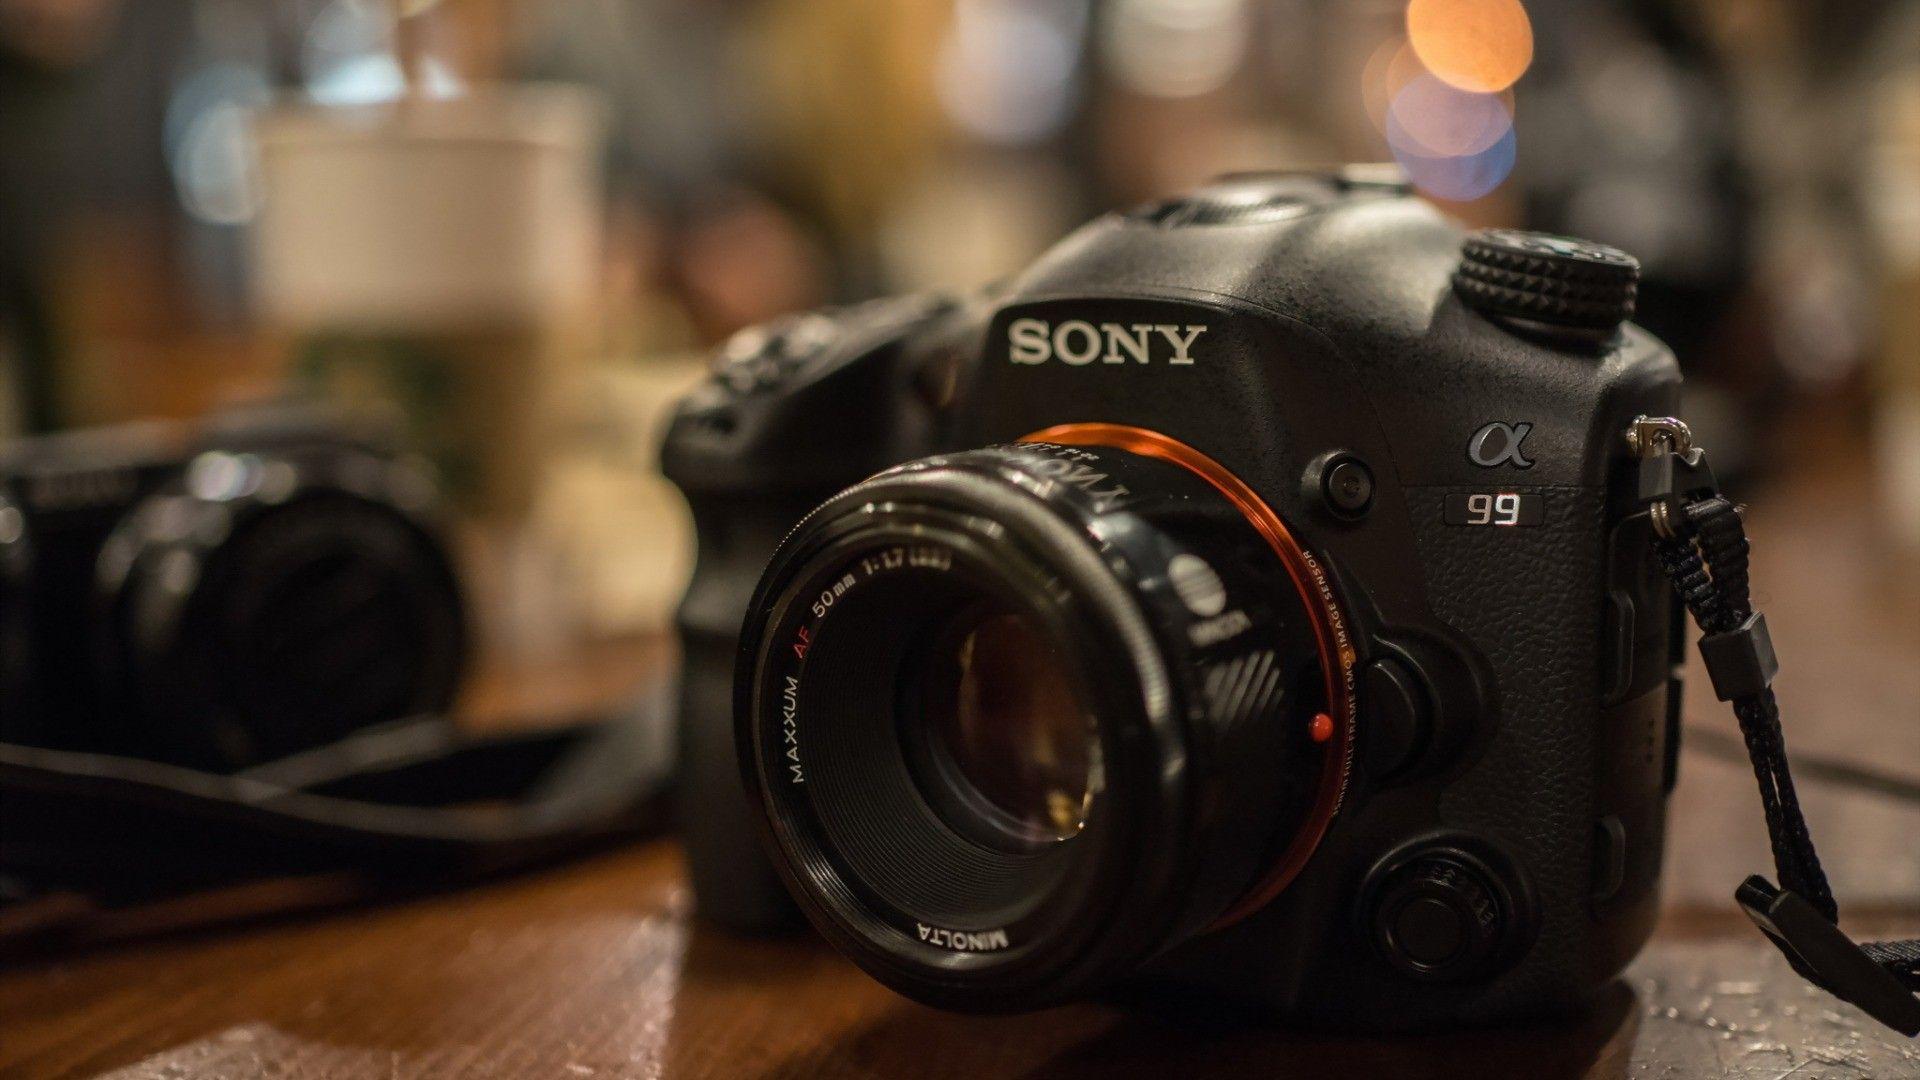 Sony Digital Camera wallpaper and image, picture, photo